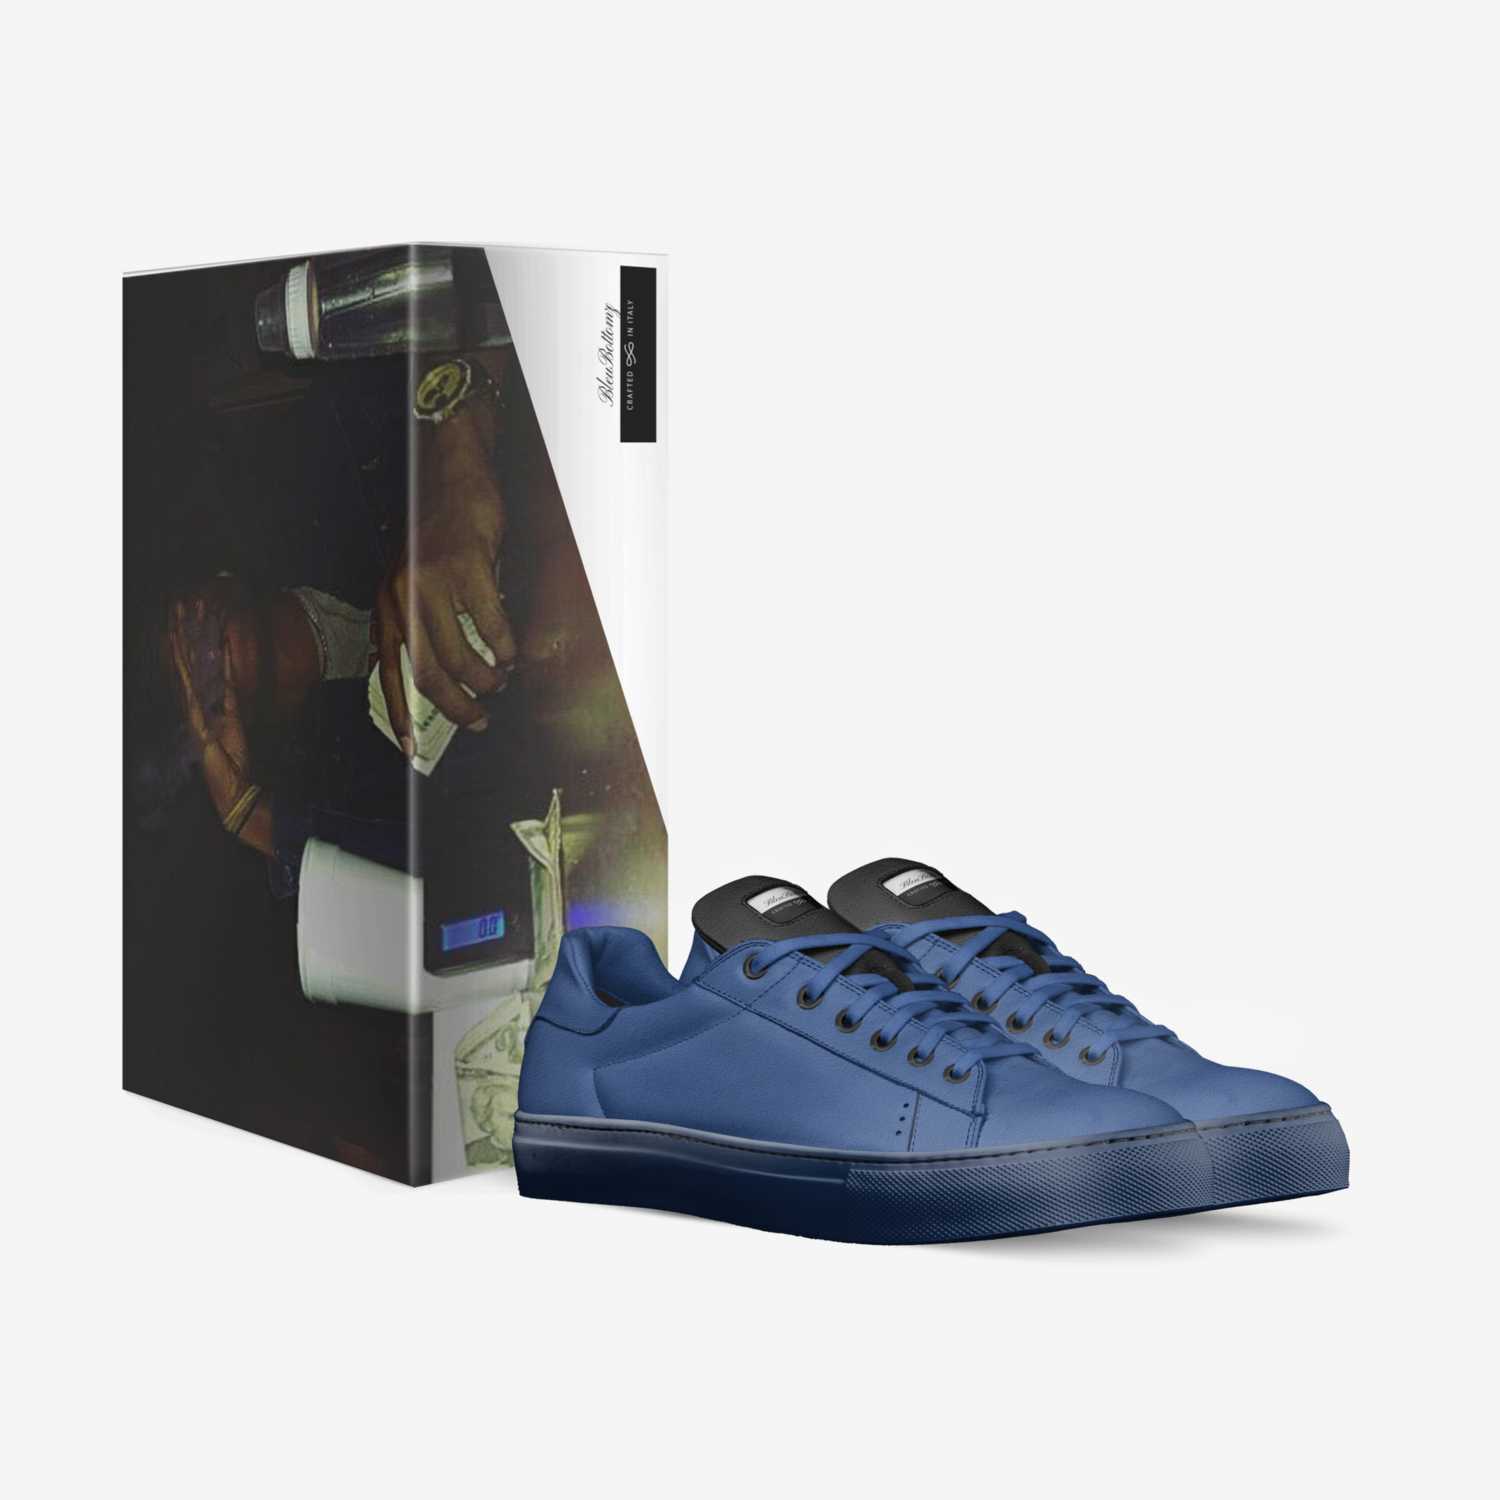 BleuBottomz custom made in Italy shoes by Mykal Coleman | Box view